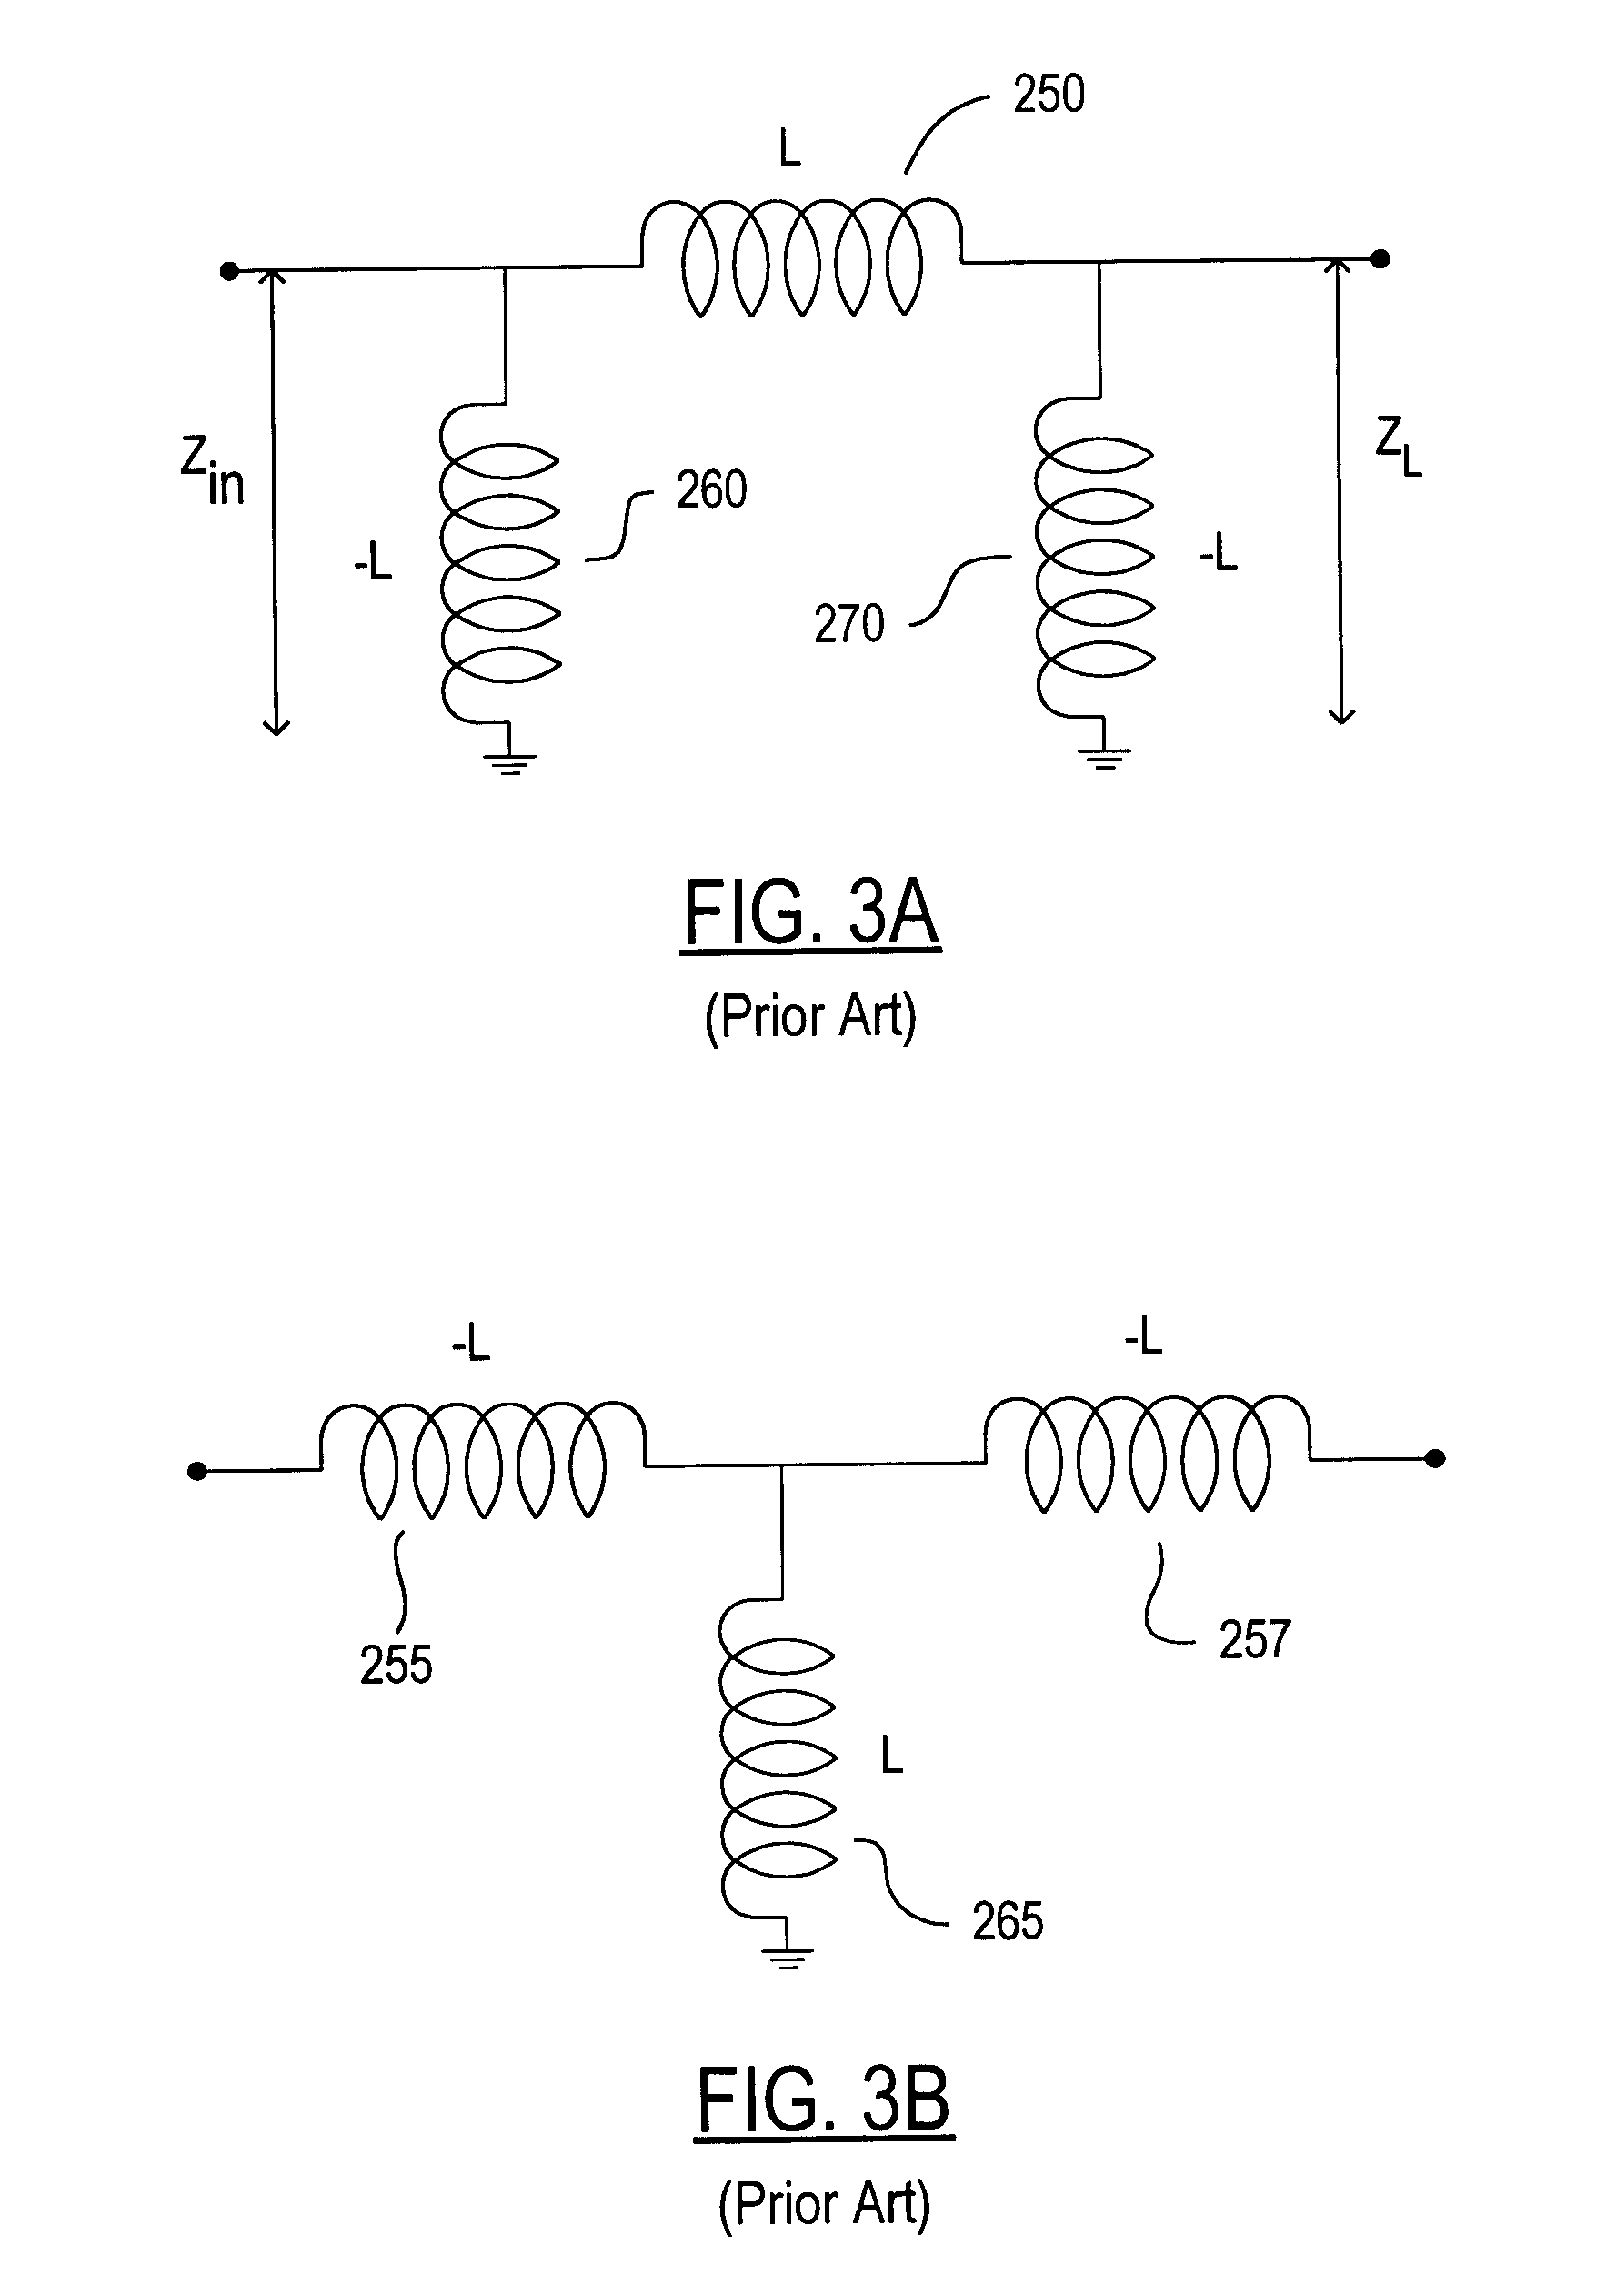 Switched-mode power amplifier using lumped element impedance inverter for parallel combining